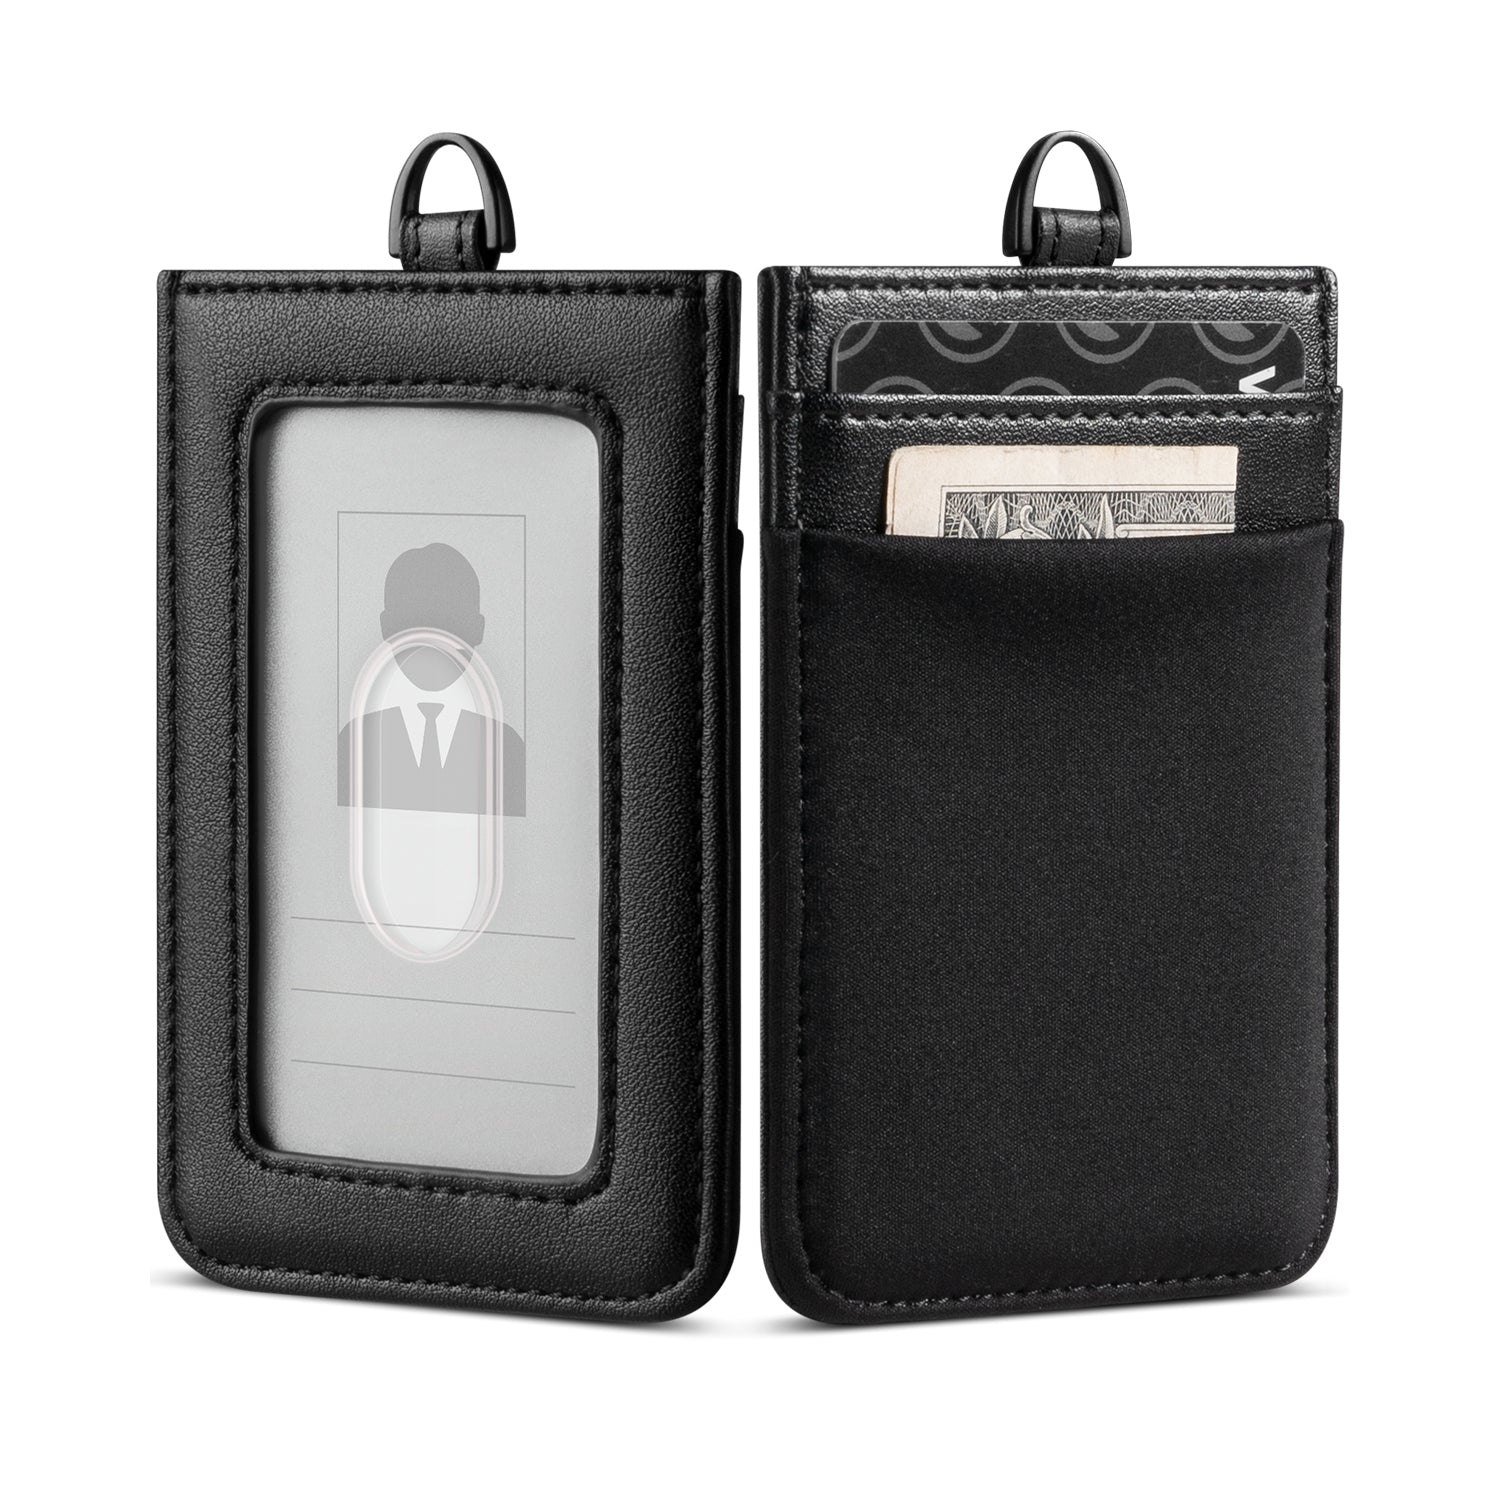 Buy Id Card Neck Strap Online In India -  India